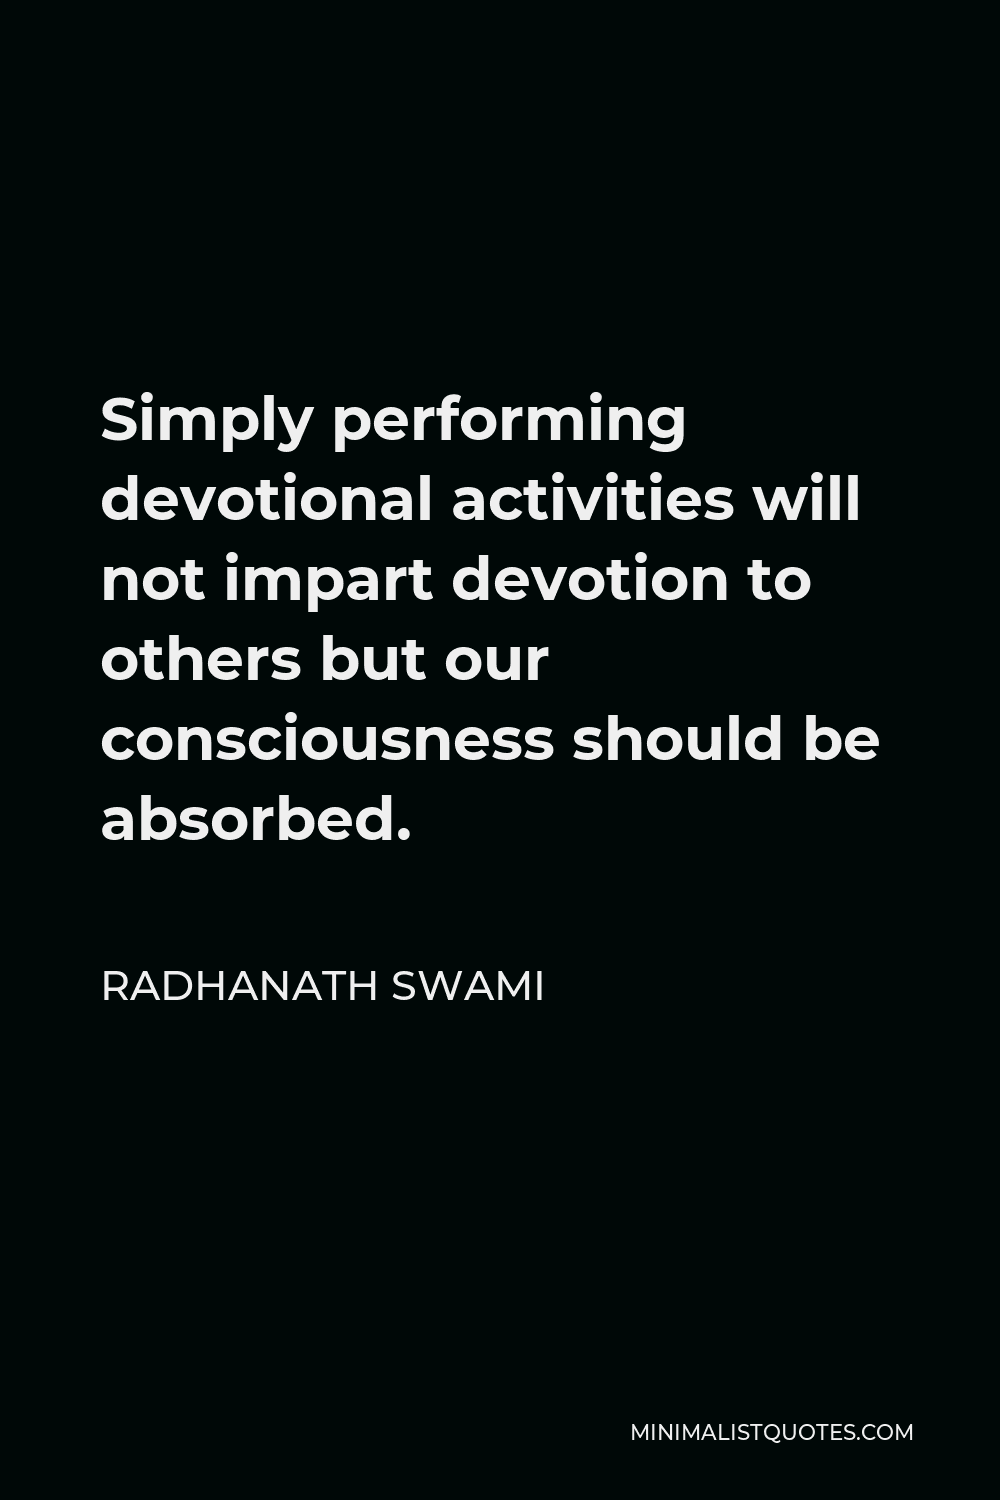 Radhanath Swami Quote - Simply performing devotional activities will not impart devotion to others but our consciousness should be absorbed.